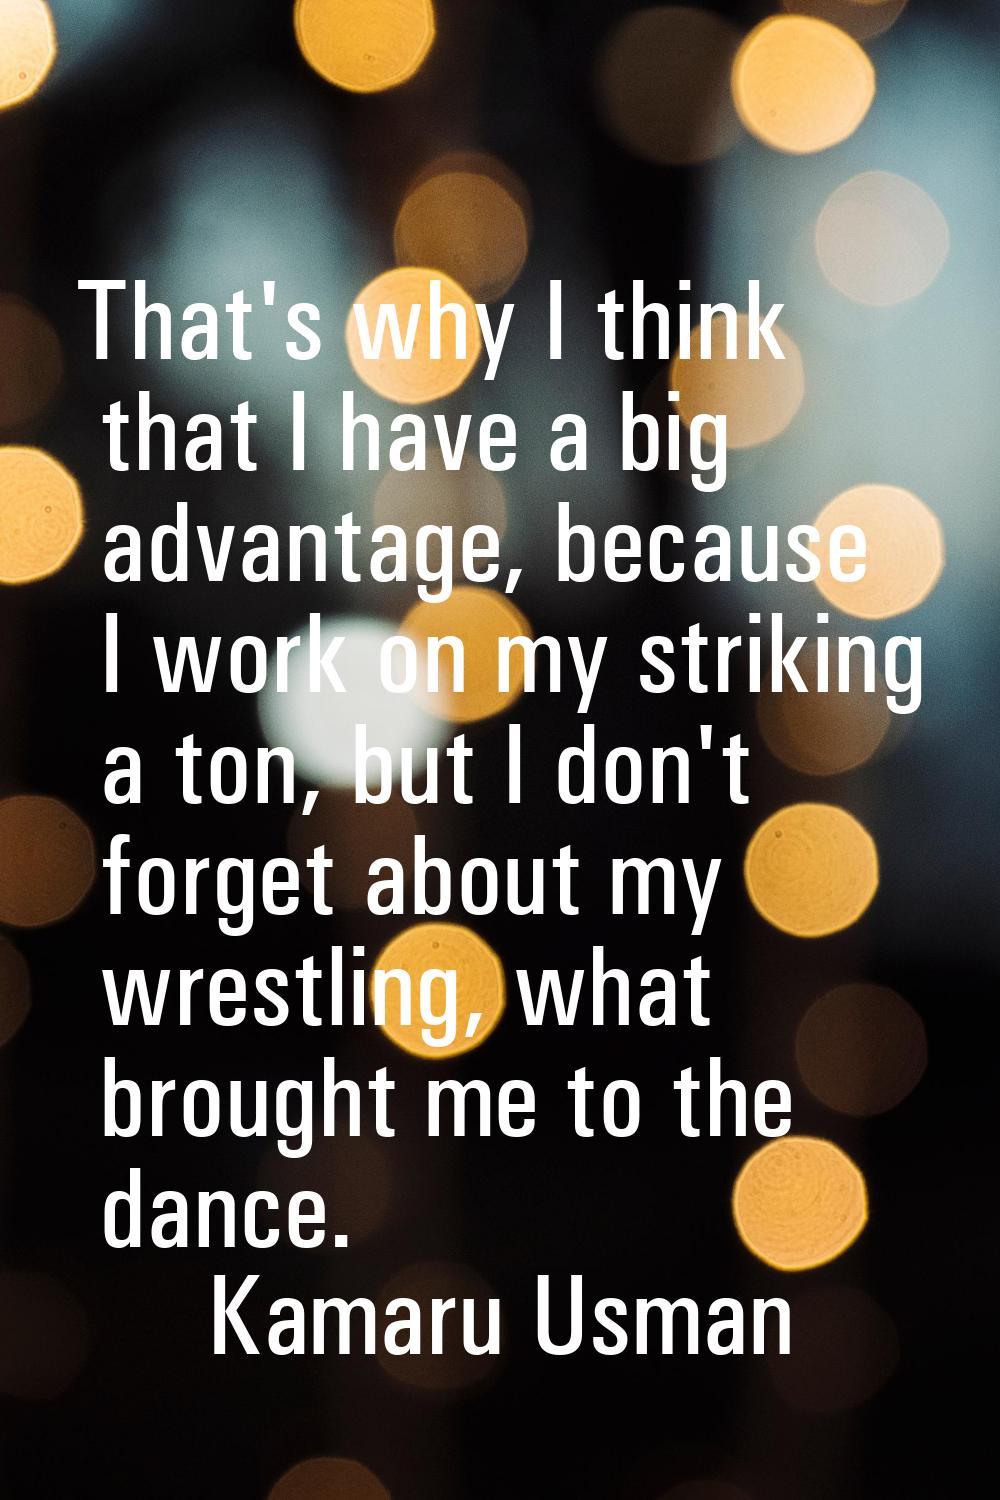 That's why I think that I have a big advantage, because I work on my striking a ton, but I don't fo